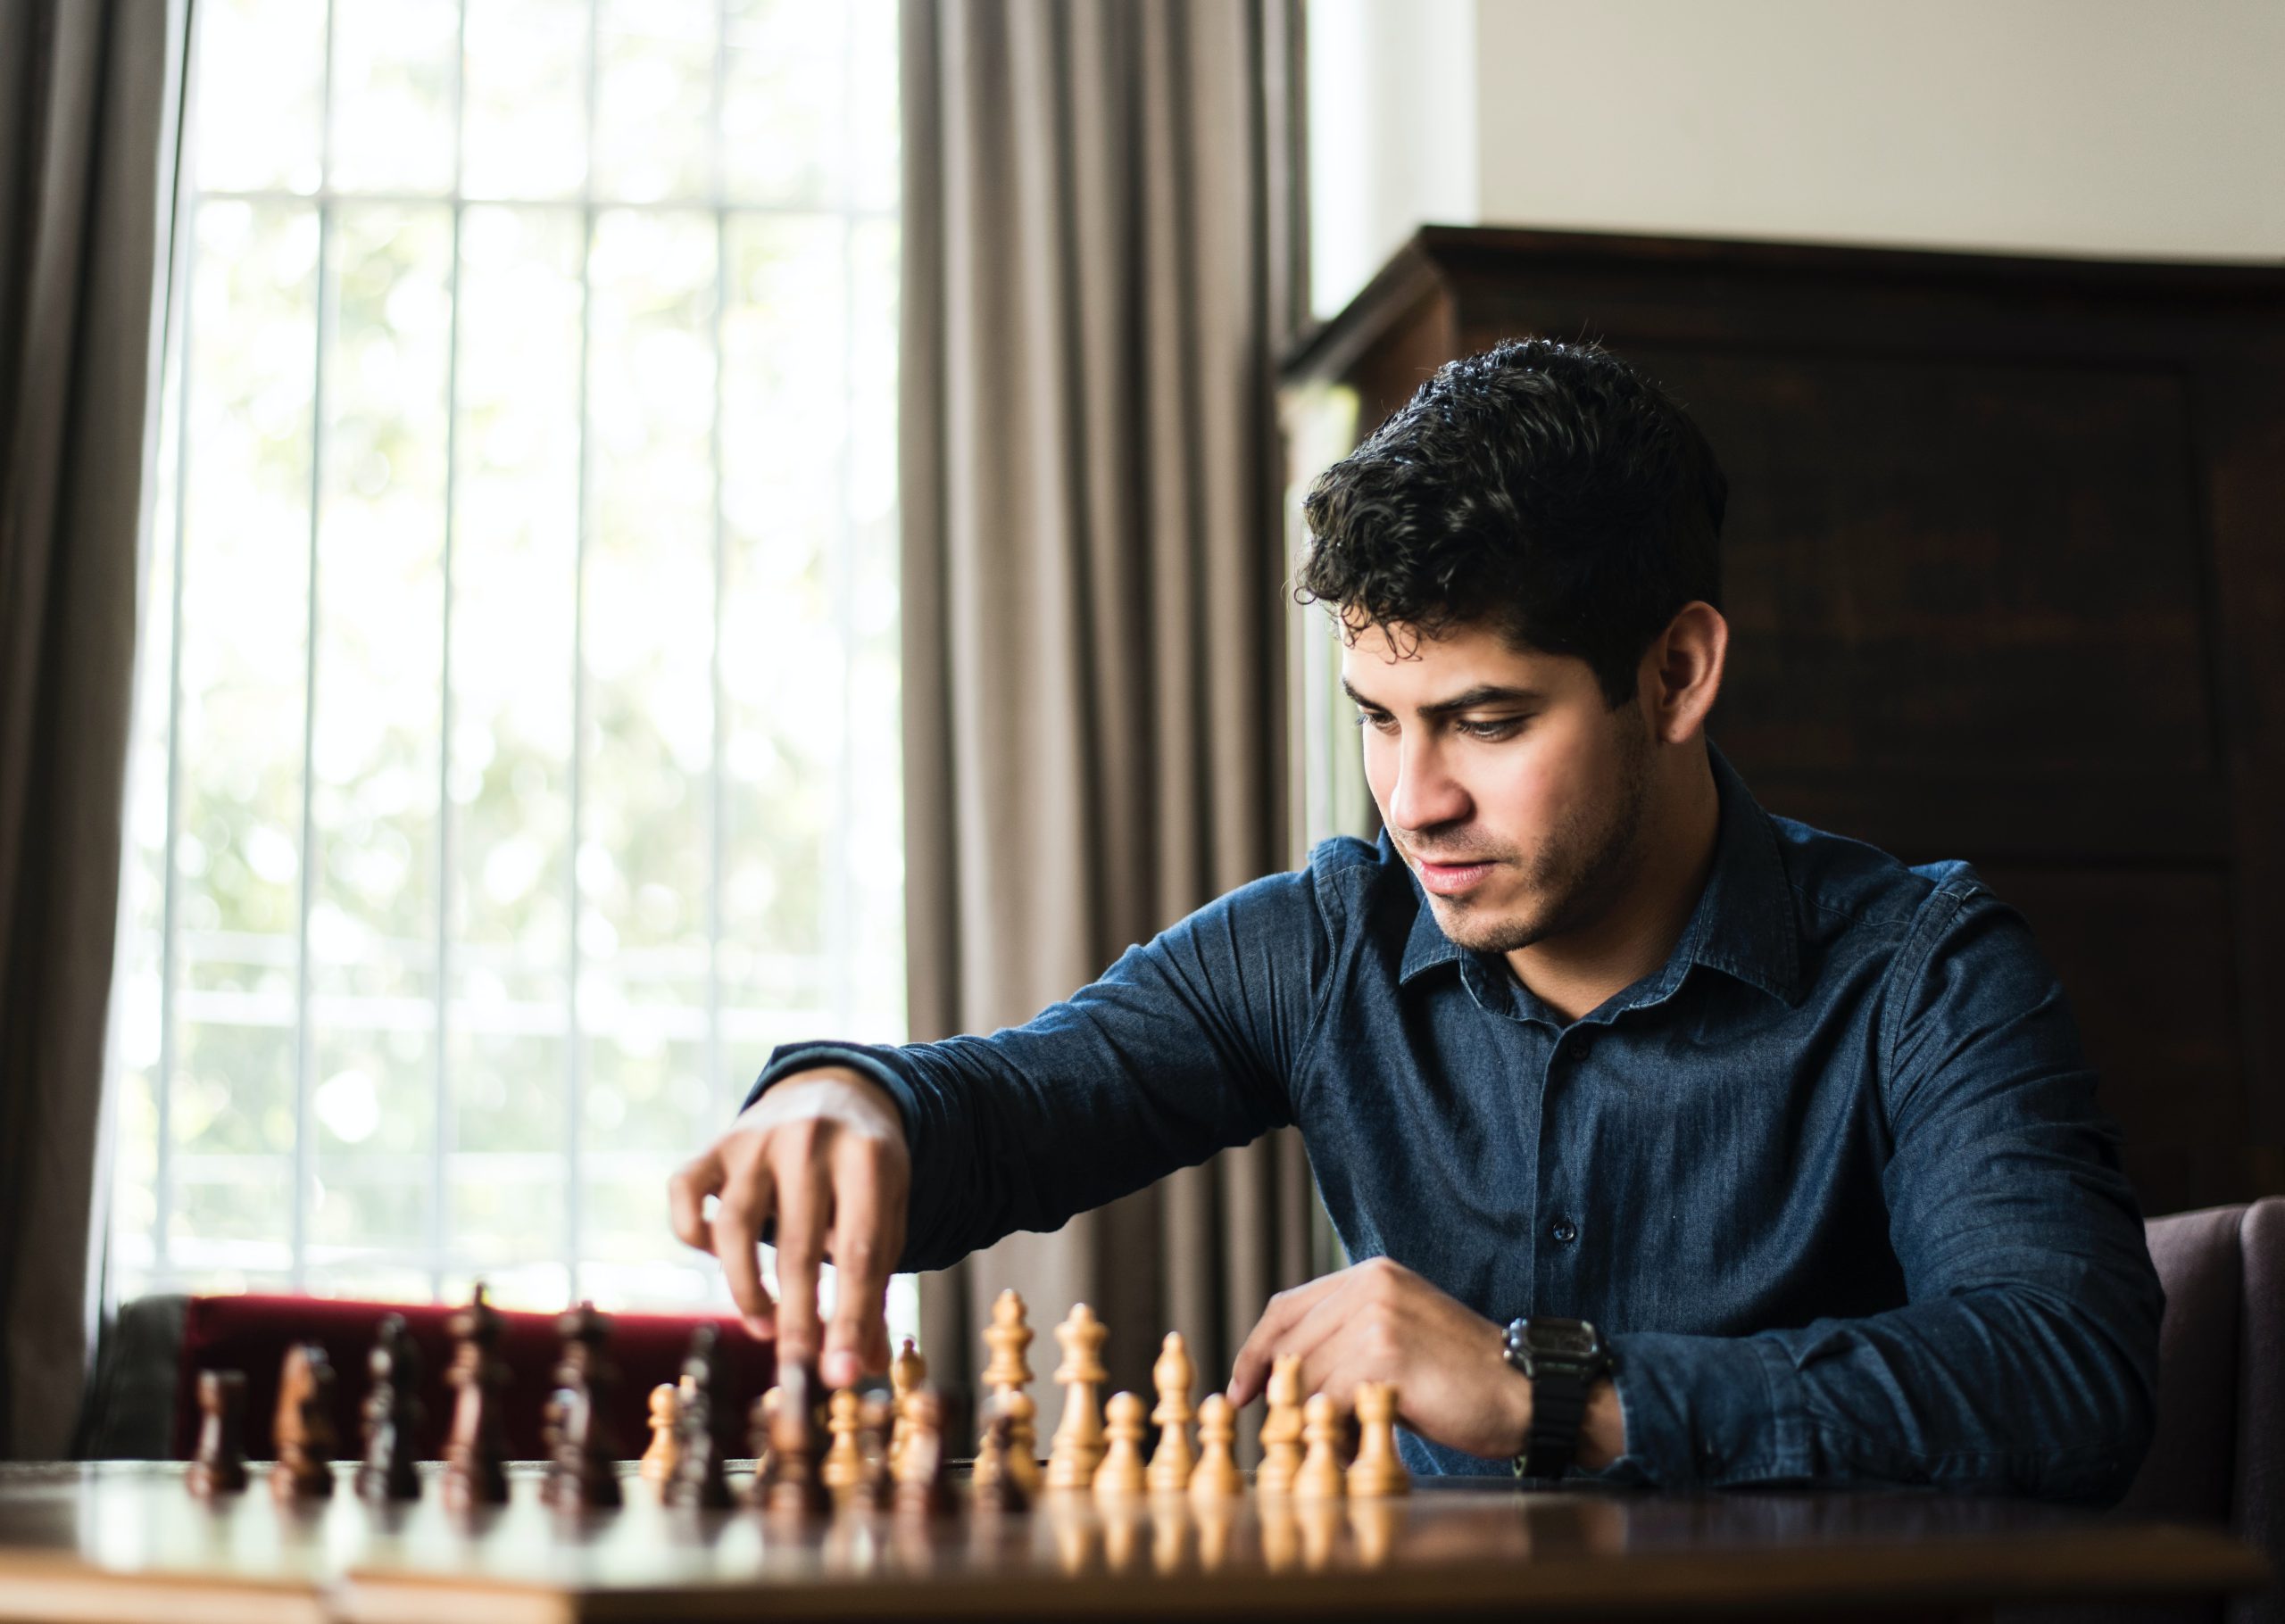 10 Best Chess Quotes • Chess Multiplayer